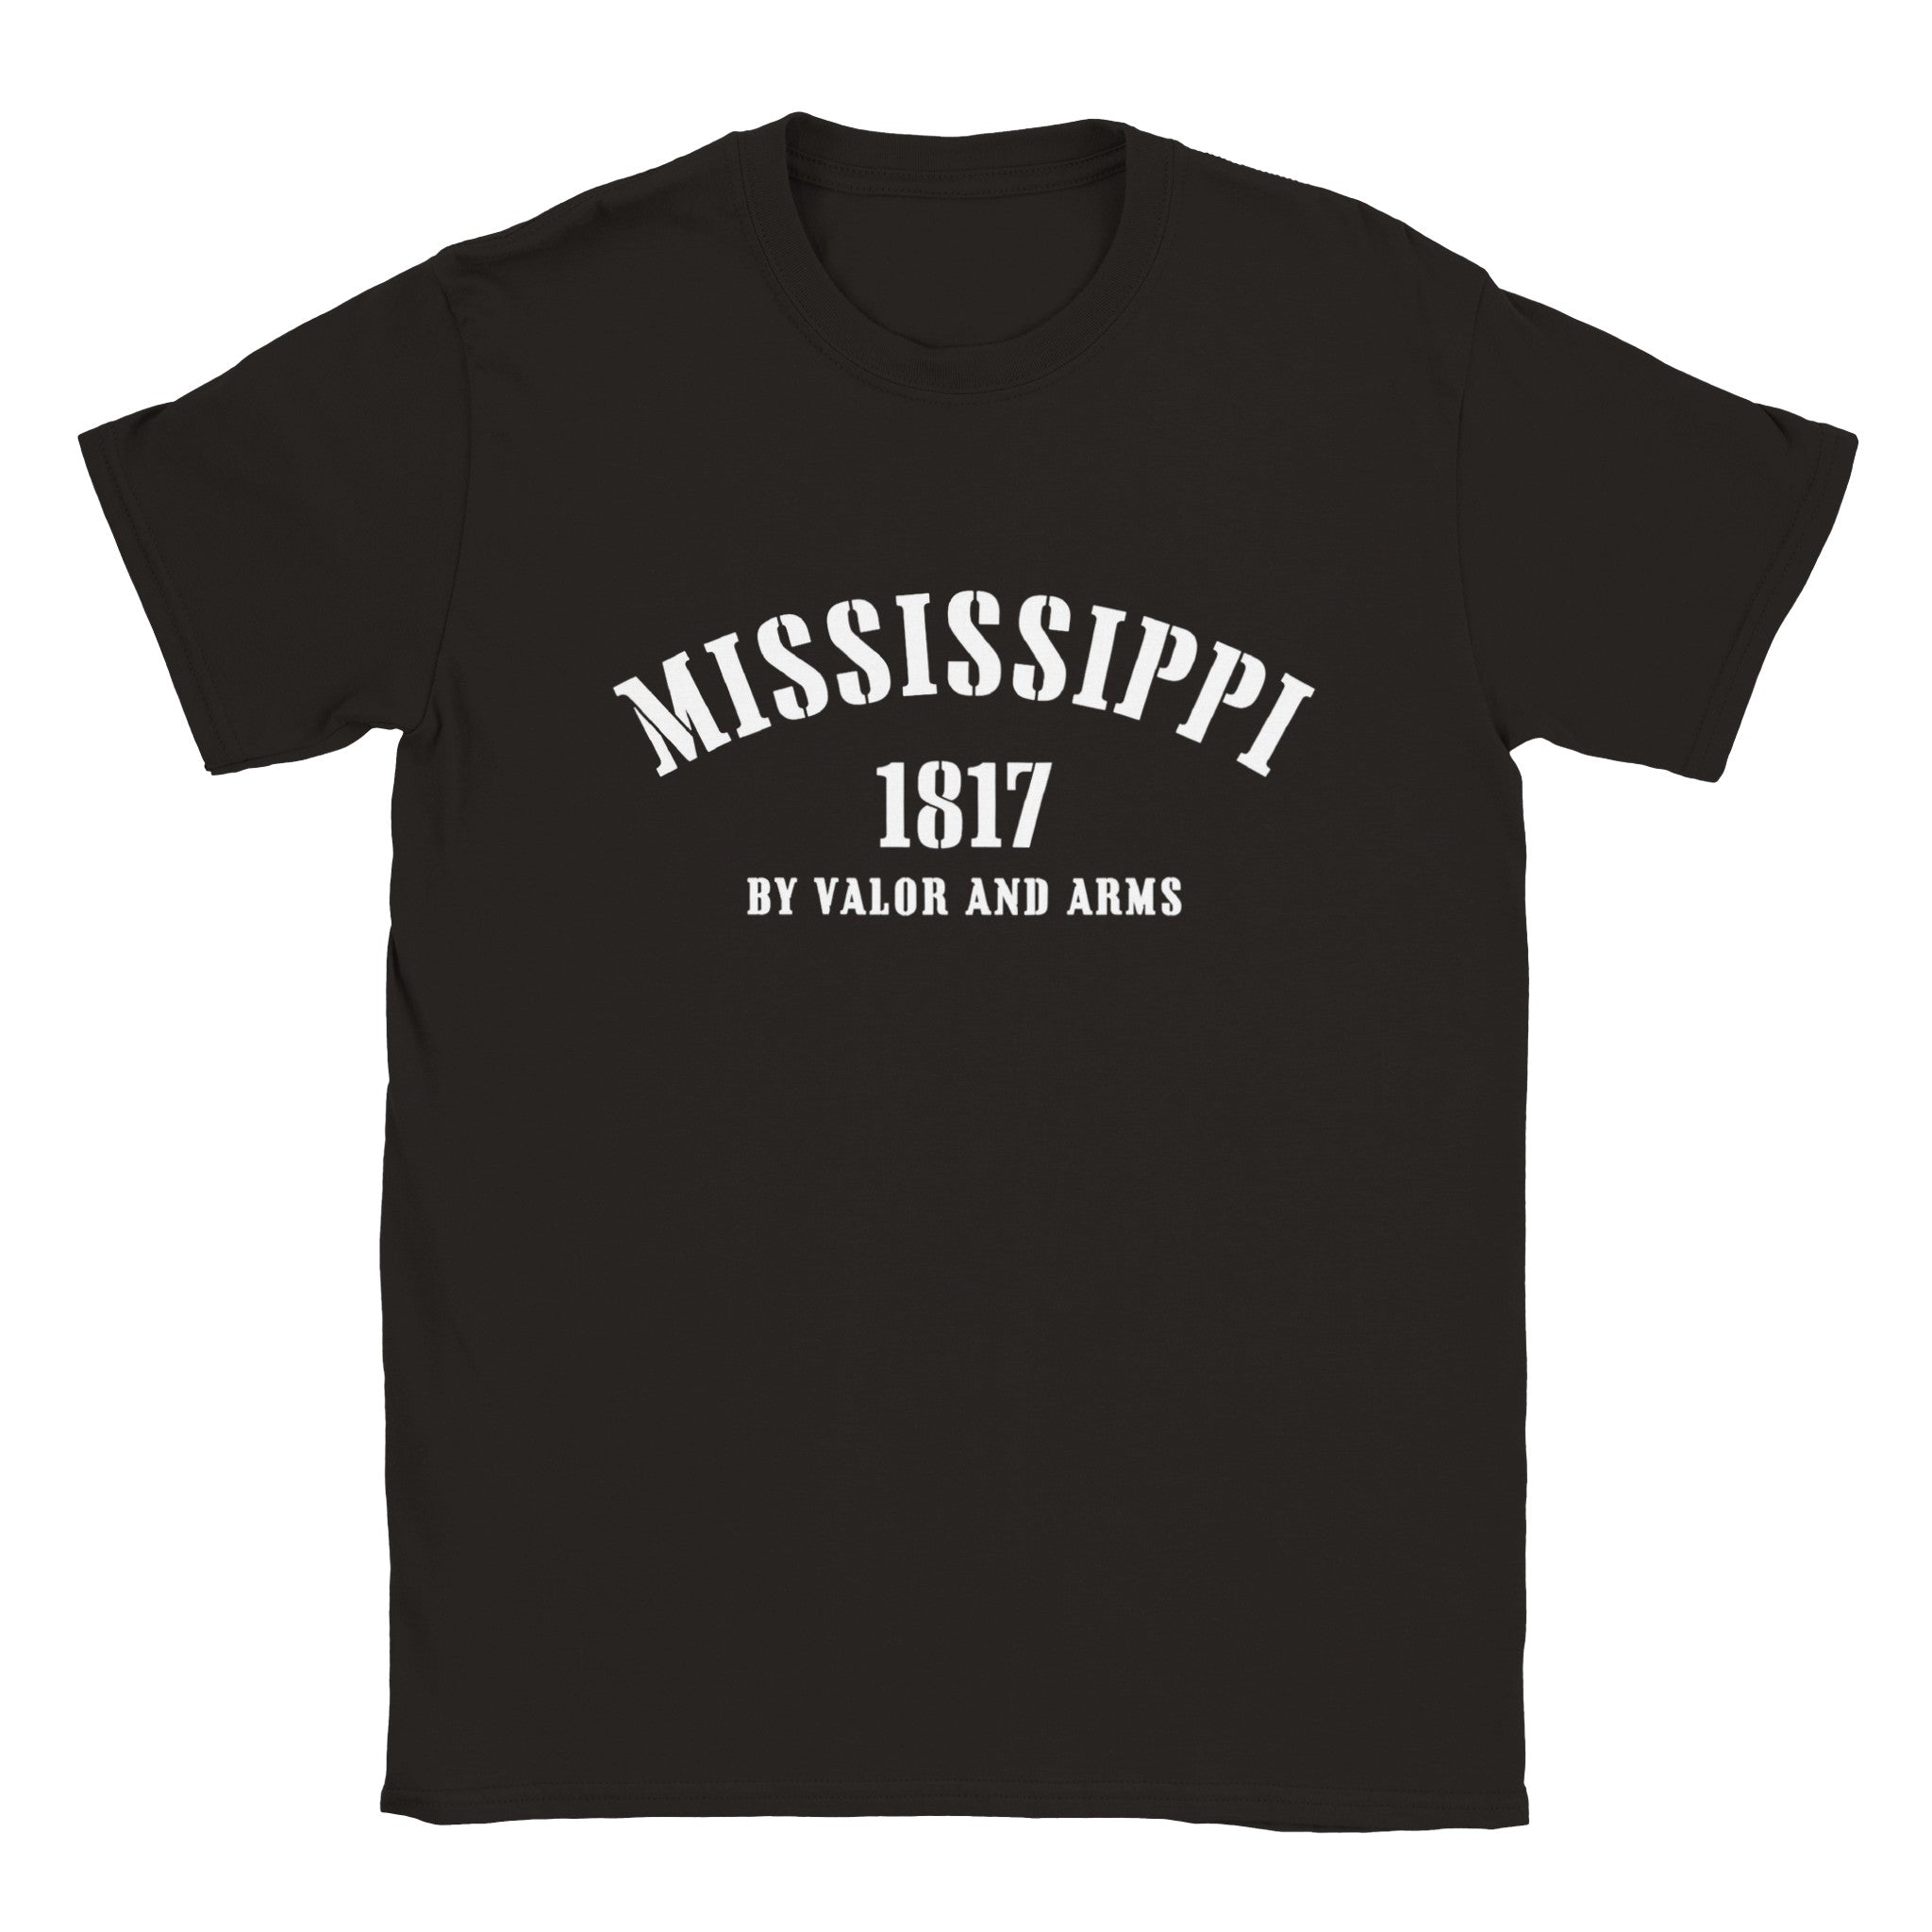 Mississippi- Classic Unisex Crewneck States T-shirt - Creations by Chris and Carlos